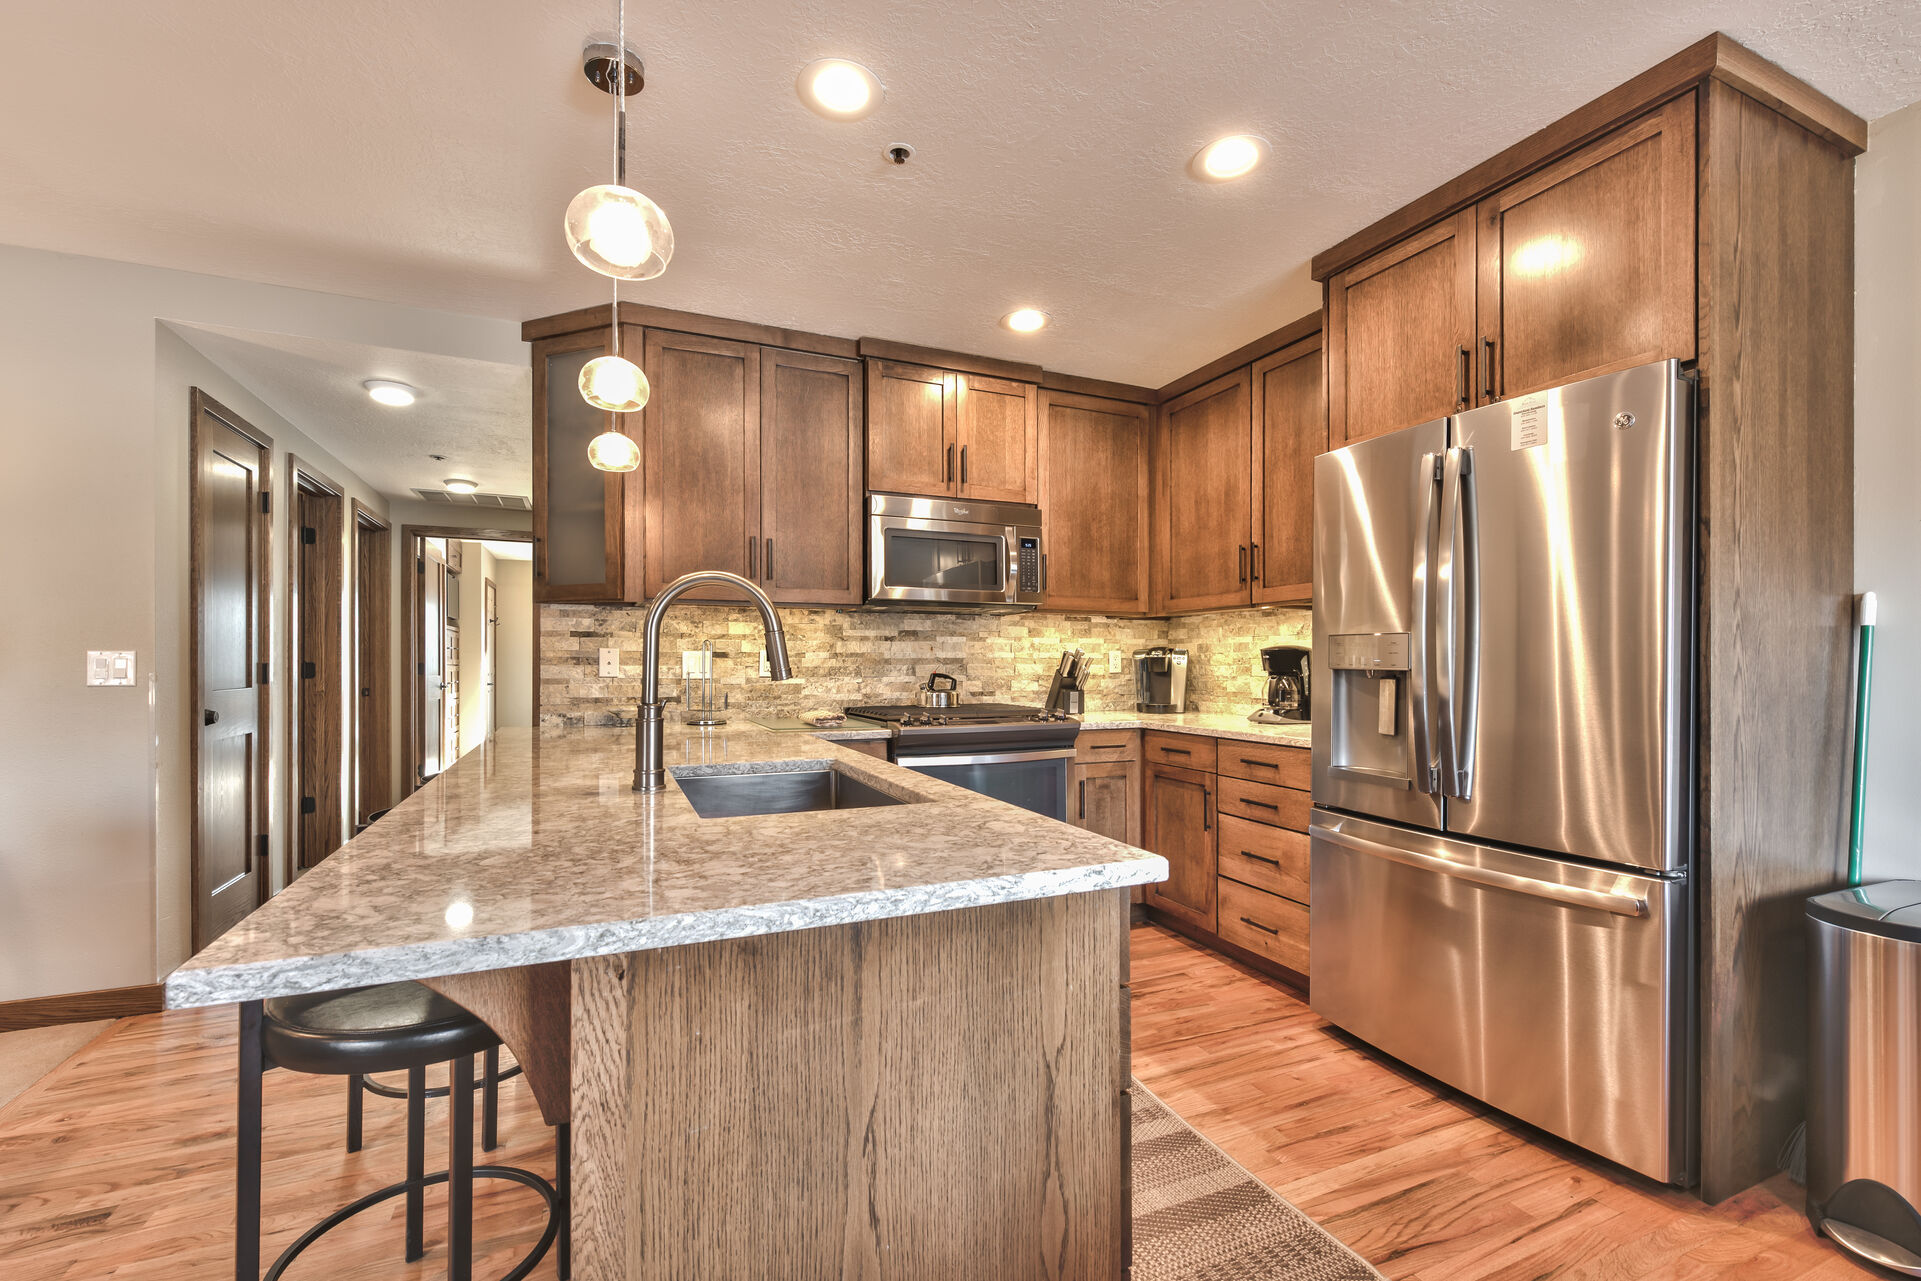 Upgraded Fully Equipped Kitchen with Stainless Steel Appliances, Granite Countertops, and 3-Seat Bar Area